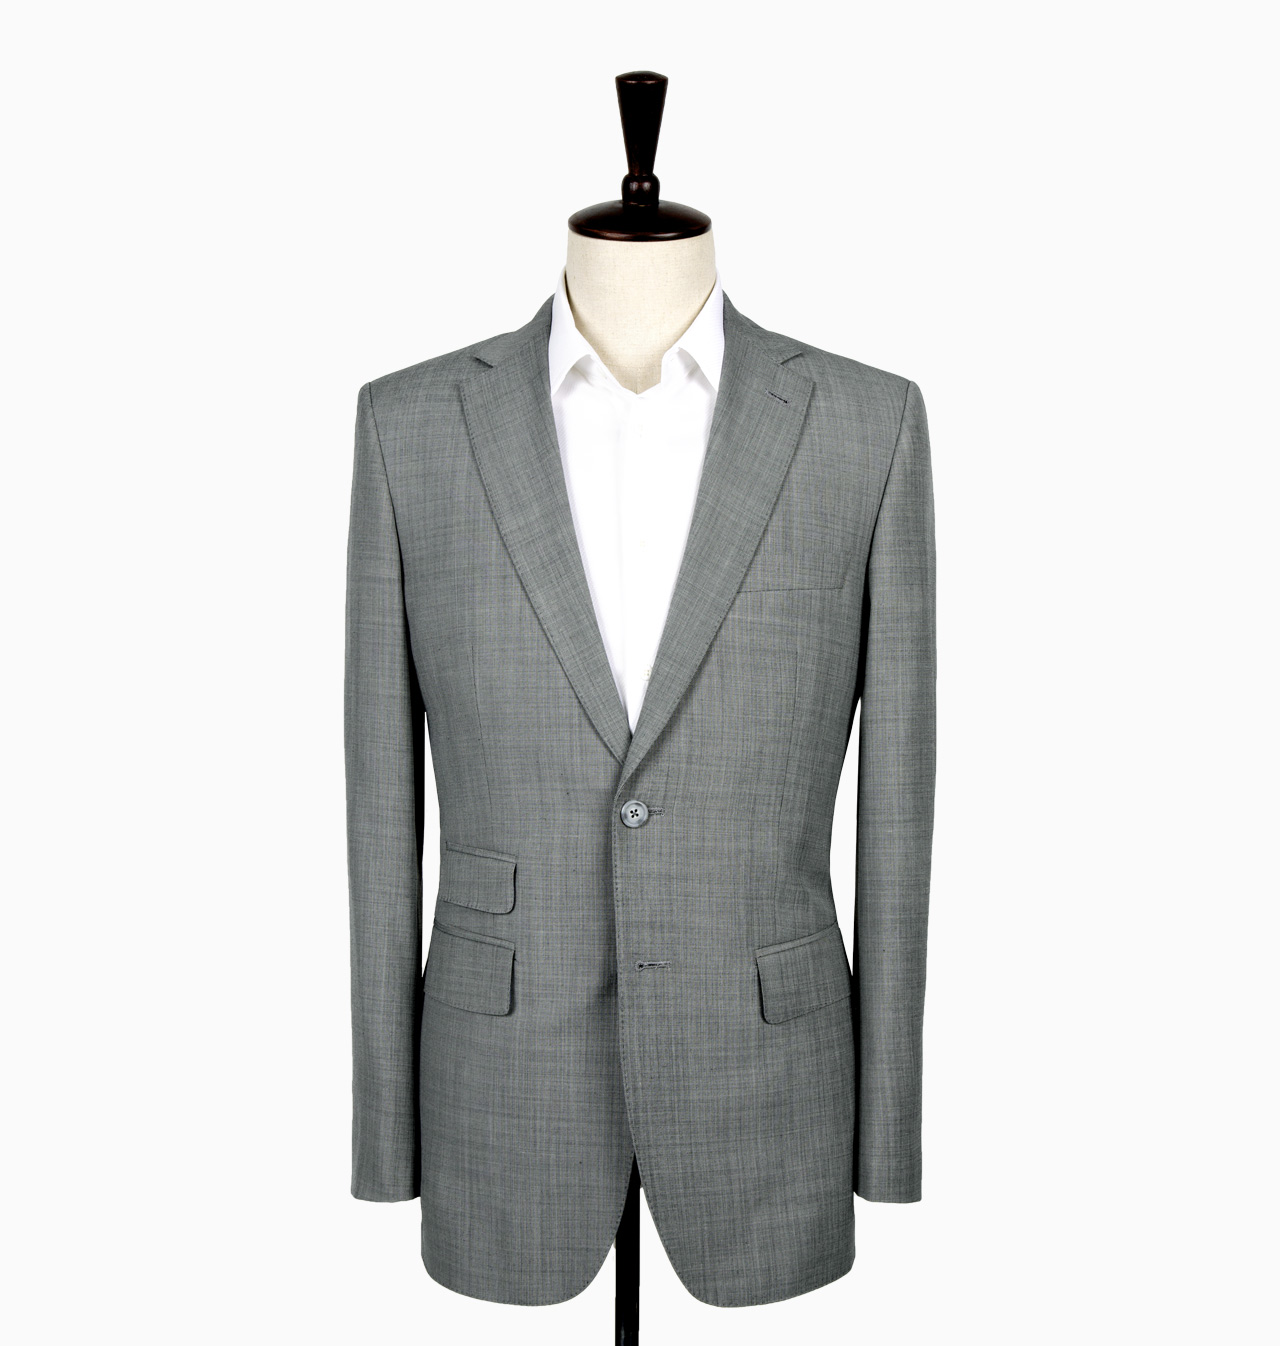 Earthy Grey Worsted / S1597 - Suiting